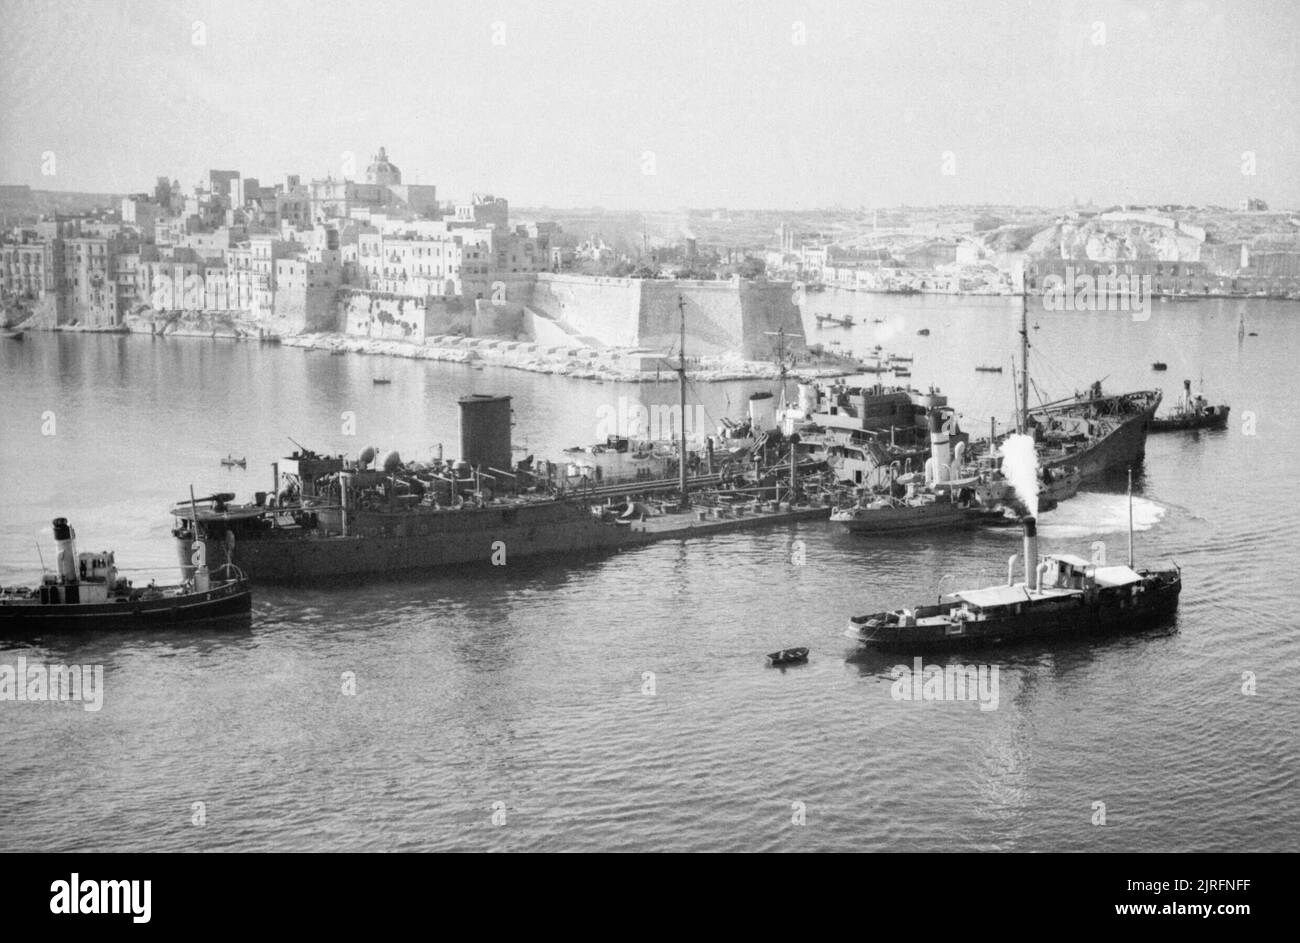 Operation Pedestal and the Siege of Malta, August 1942 The damaged tanker OHIO, supported by Royal Navy destroyers, approaches Malta after an epic voyage across the Mediterranean as part of convoy WS21S (Operation Pedestal) to deliver fuel and other vital supplies to the besieged island. OHIO's back was broken and her engines failed during heavy German and Italian attacks. Because of the vital importance of her cargo (10,000 tons of fuel which would enable the aircraft and submarines based at Malta to return to the offensive), she could not be abandoned. In a highly unusual manoeuvre, two dest Stock Photo